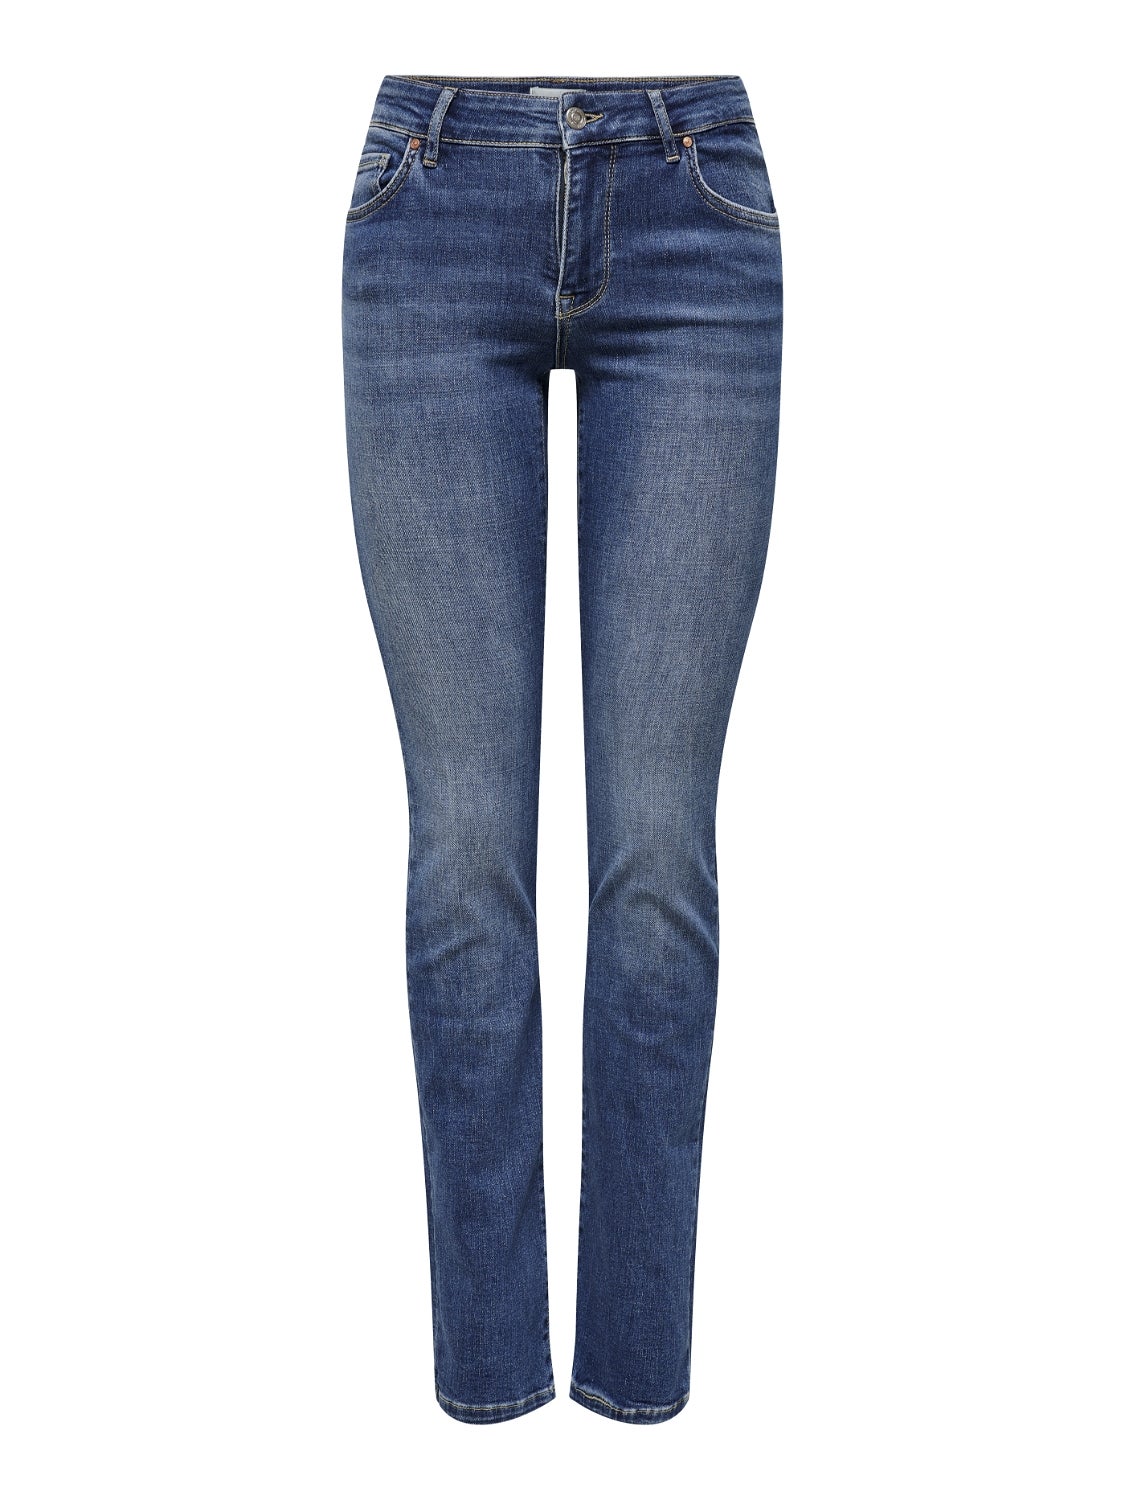 Mode Jeans Jeans taille basse only blue denim Jeans taille basse bleu style d\u00e9contract\u00e9 